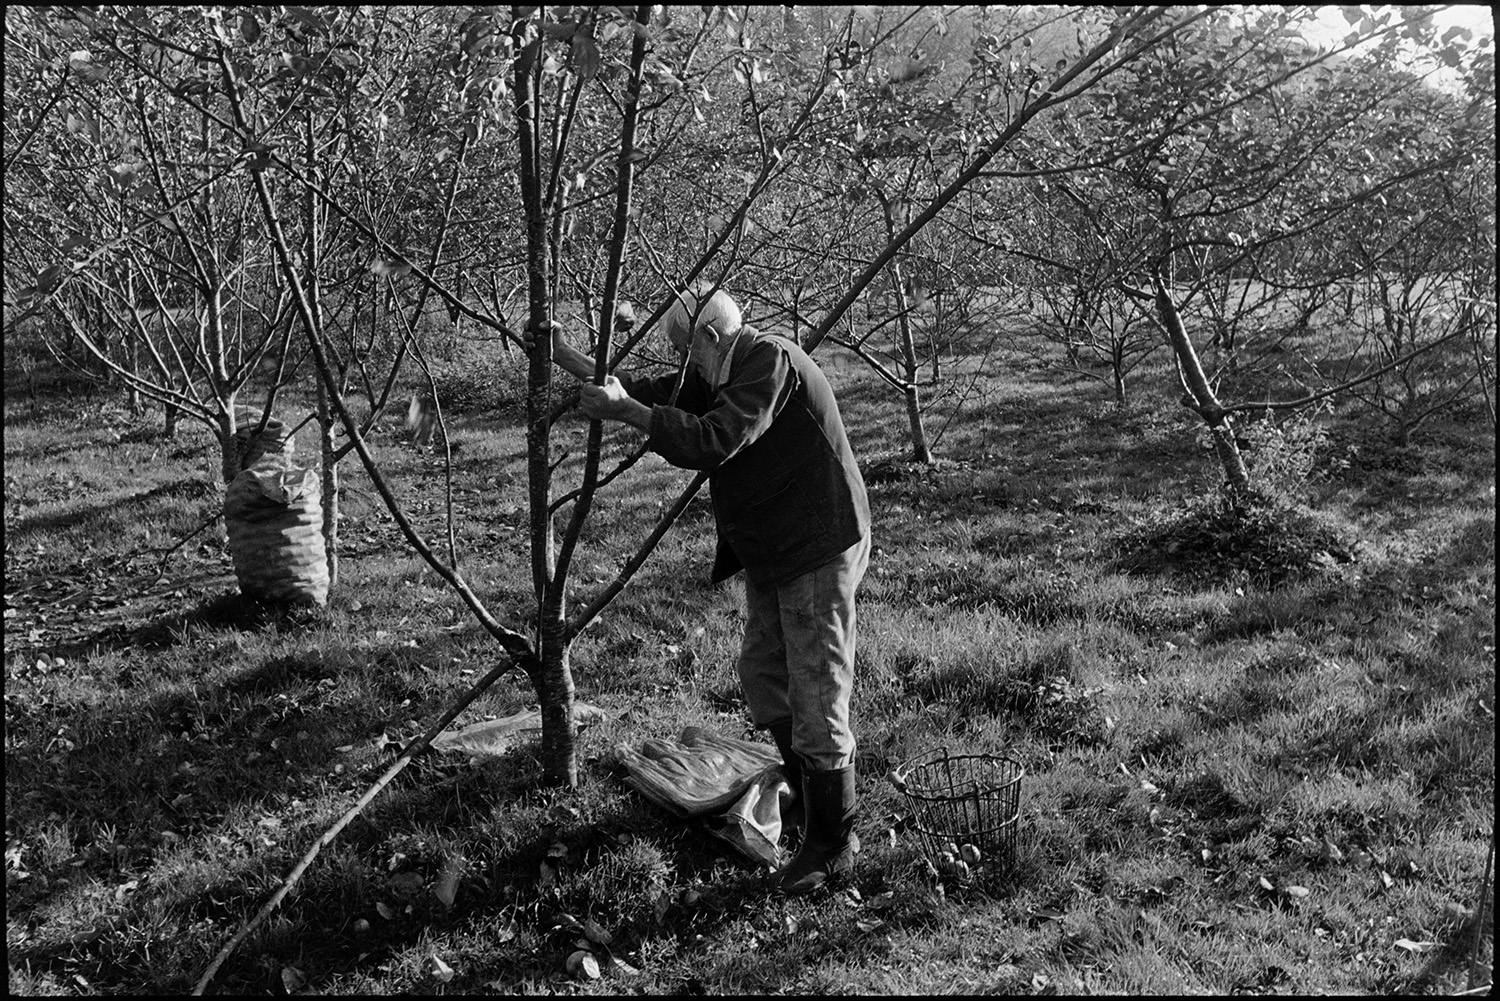 Cider making, men shaking trees and picking apples. 
[William Saunders shaking a tree to make apples fall to the ground in an orchard at Hancock's cider factory at Clapworthy Mill, South Molton. A basket is next to him and sacks of apples can be seen by a tree in the background.]